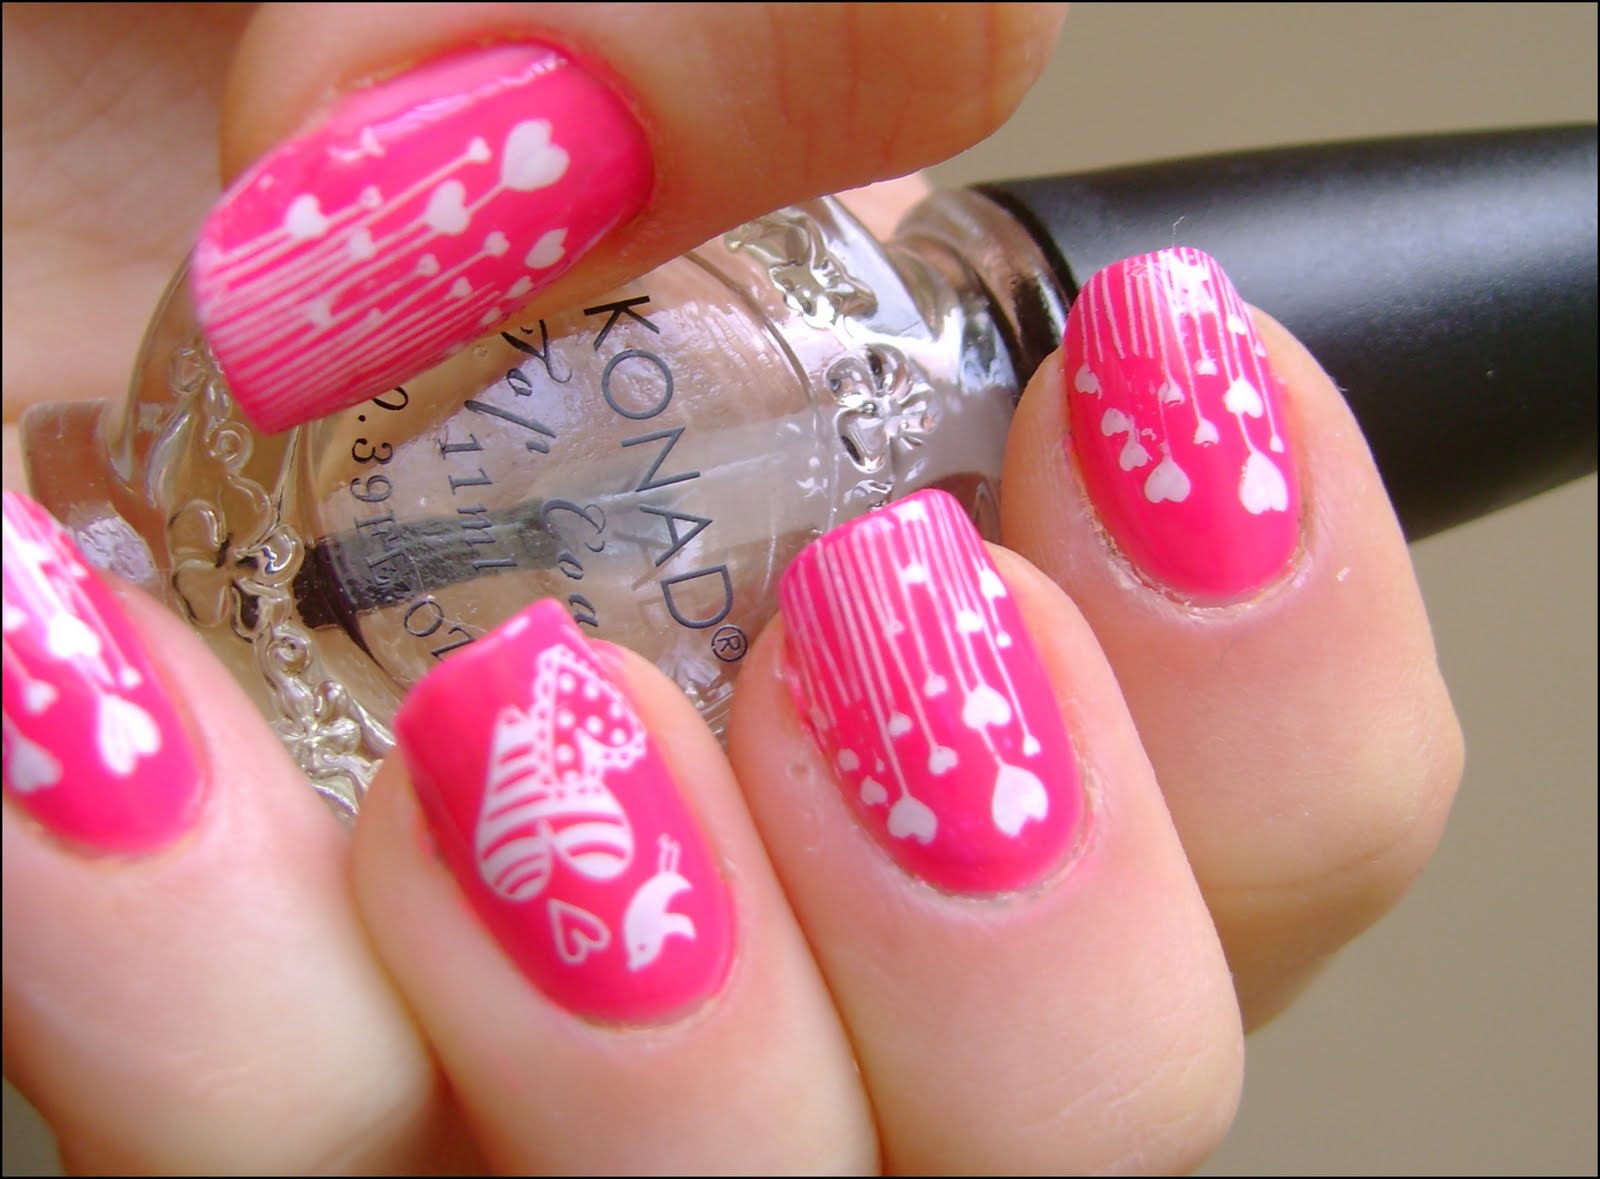 2. Freehand Acrylic Nail Art Designs - wide 3